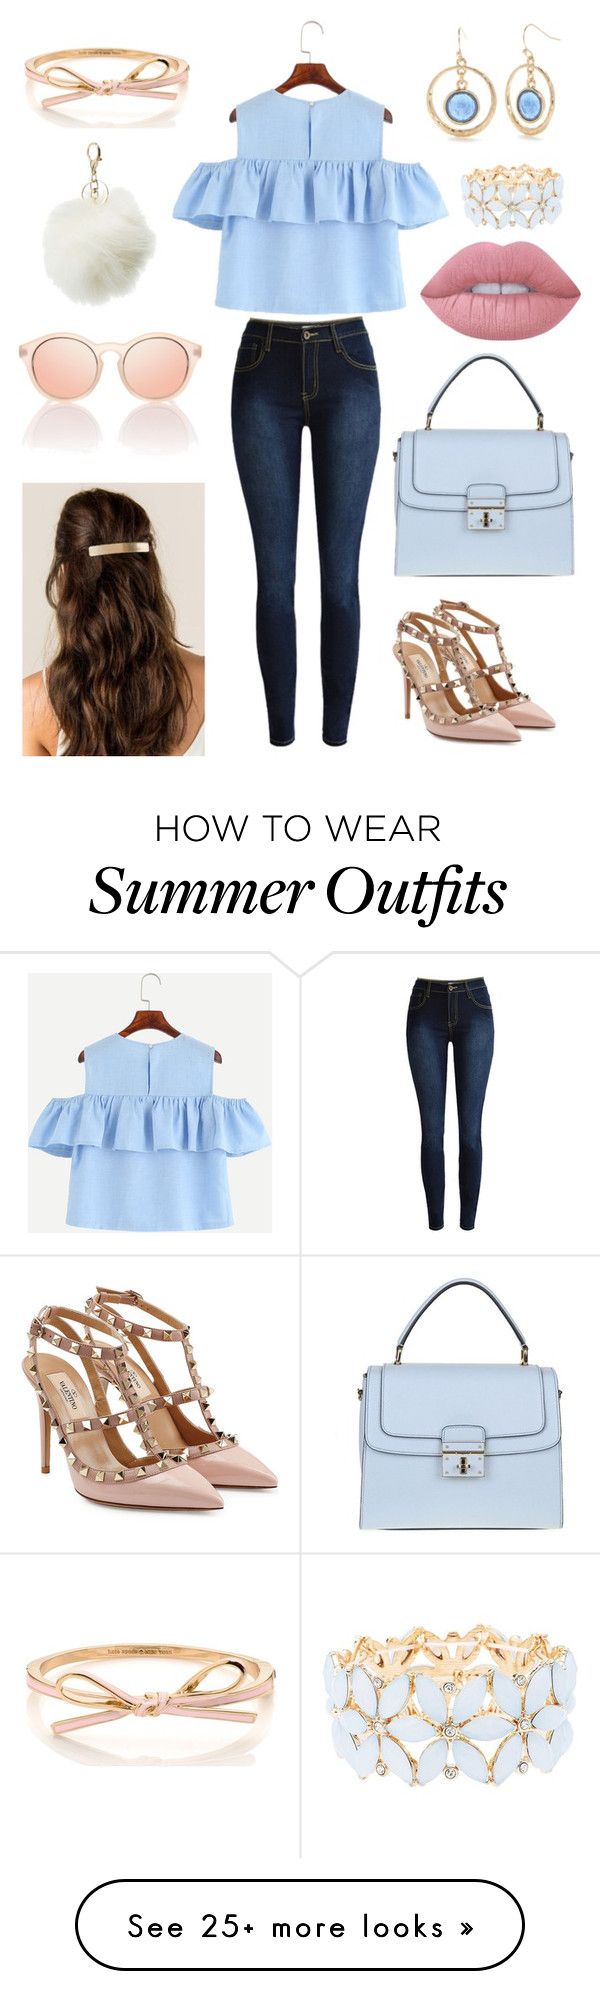 "Cute daytime summer outfit" by holliemichelle-j on Polyvore featuring...